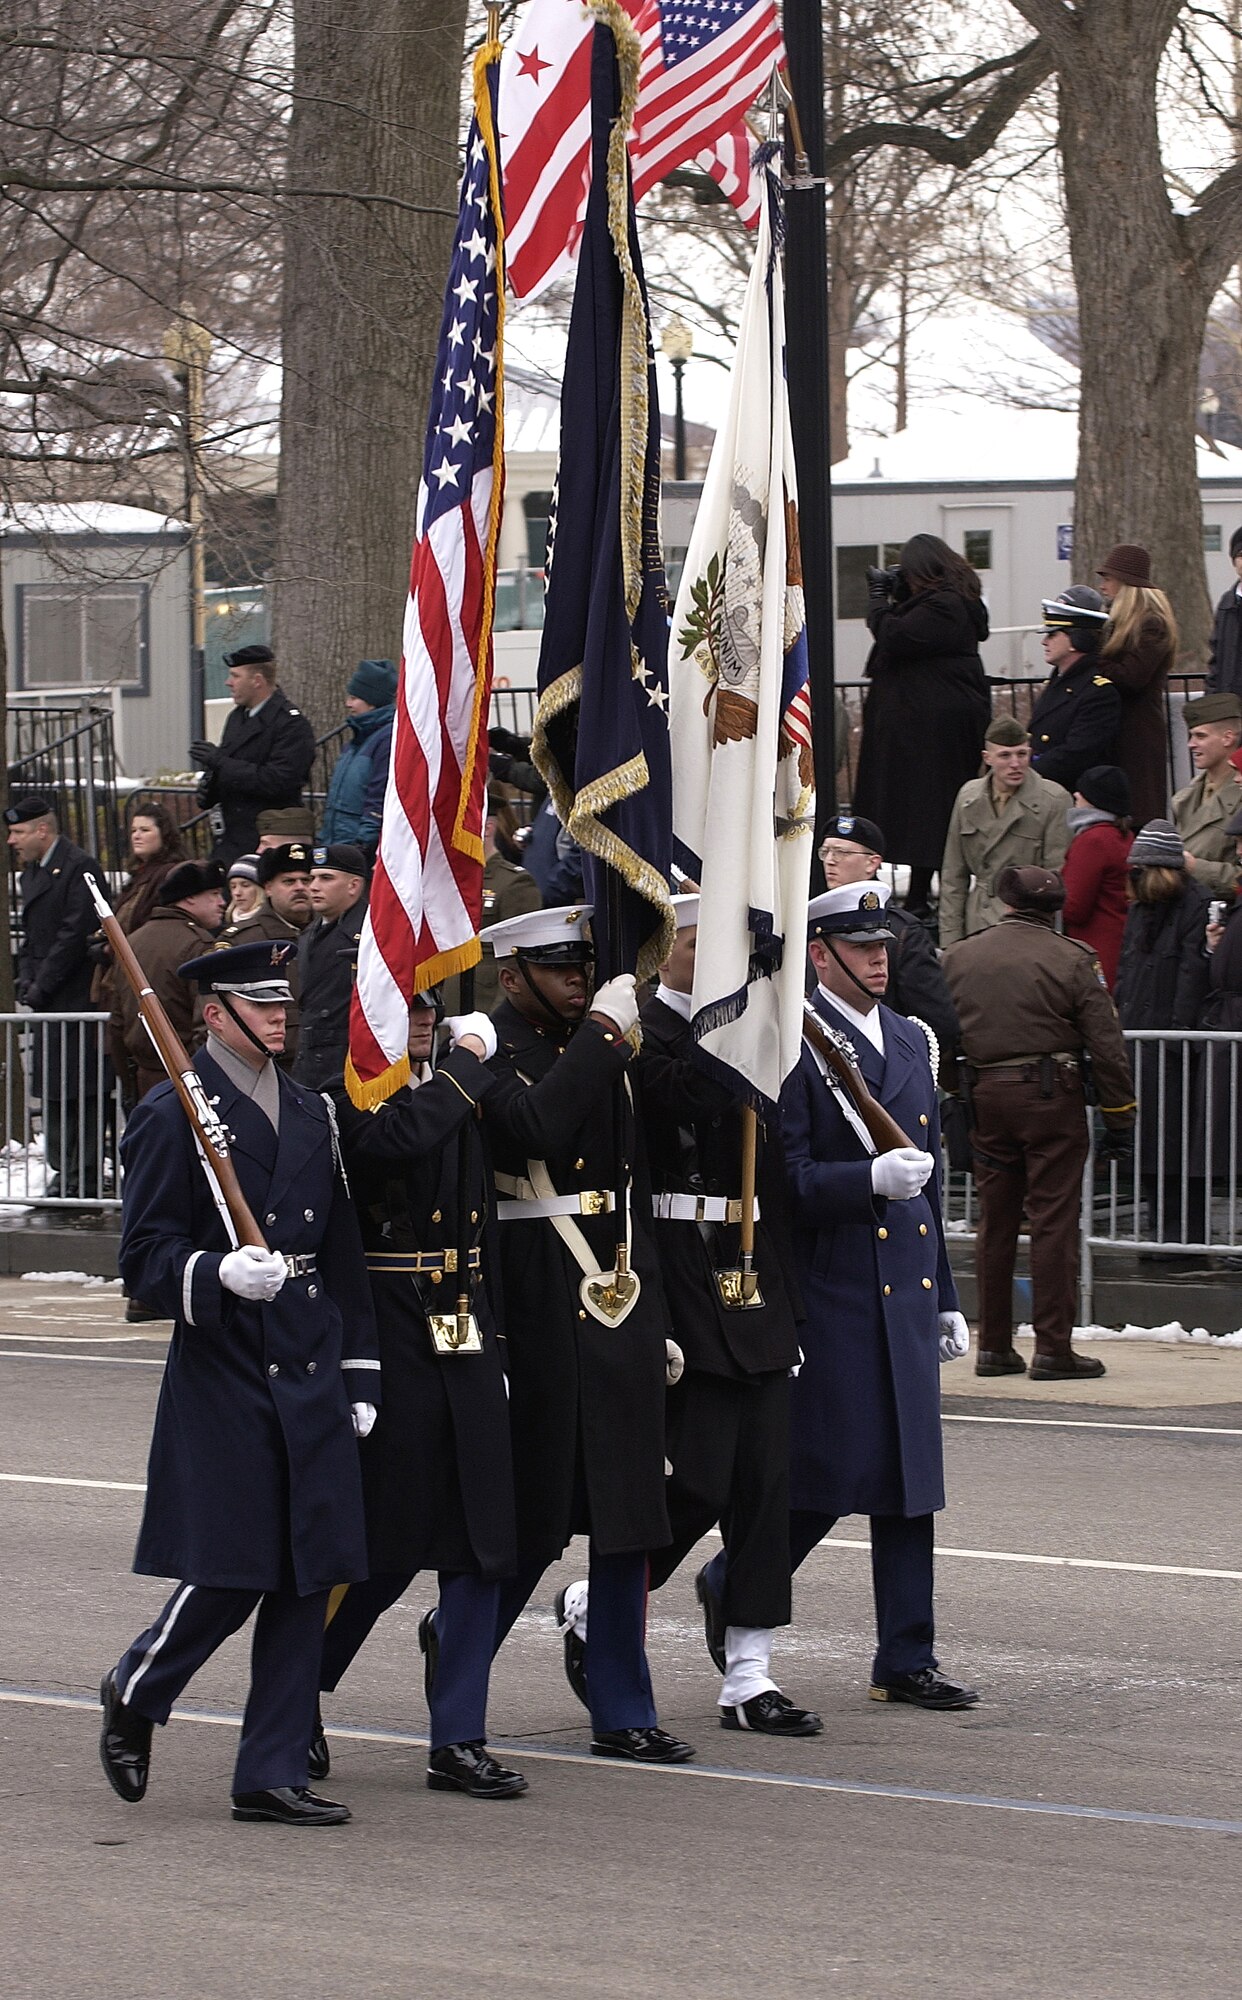 WASHINGTON -- The Joint Service Color Guard marches during the Presidential Inaugural Parade here Jan. 20.  Joint Task Force-Armed Forces Inaugural Committee officials are responsible for coordinating all military ceremonial support for the inauguration.  Support included musical units, marching units, color guards, firing details and salute batteries.  (U.S. Air Force photo by Staff Sgt. Victoria Meyer)
                       